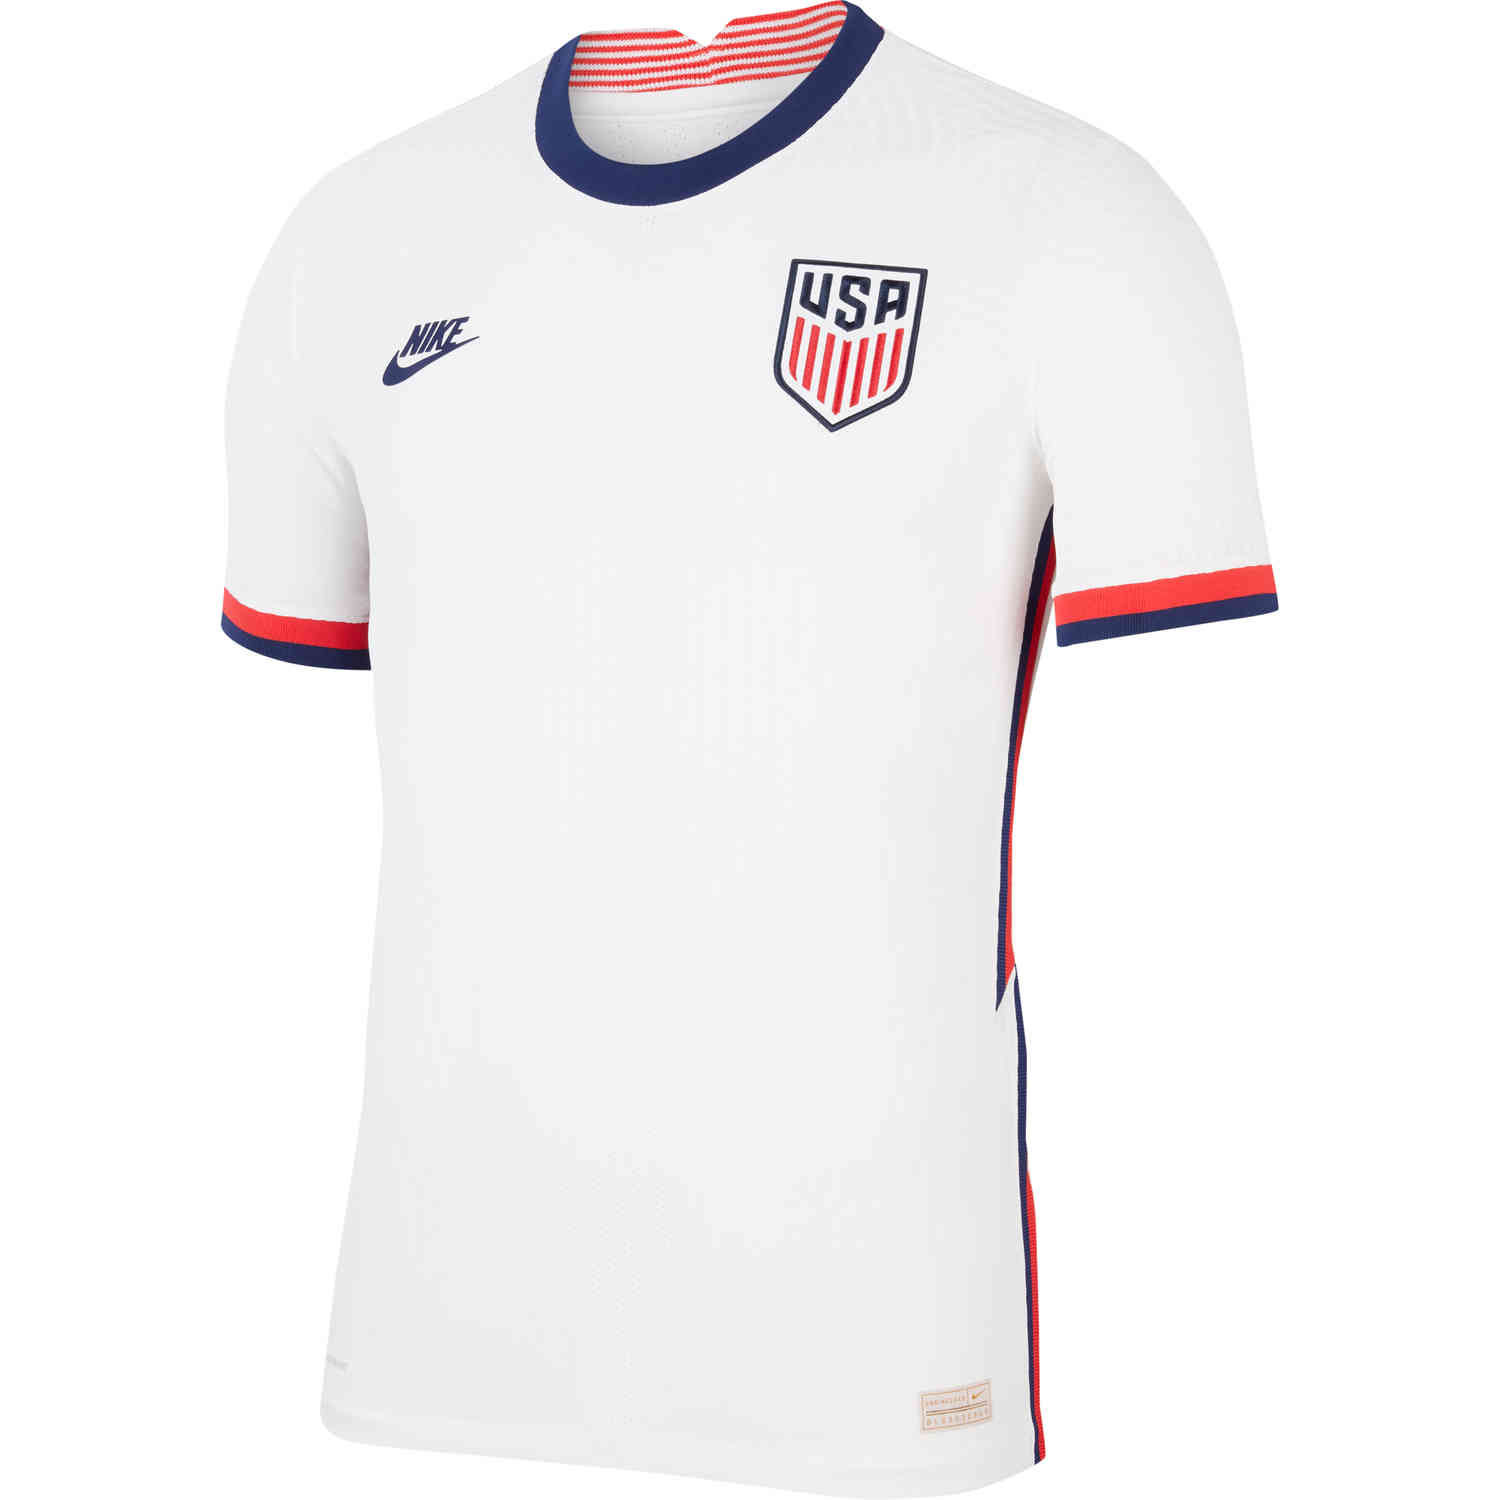 usa jersey,Save up to